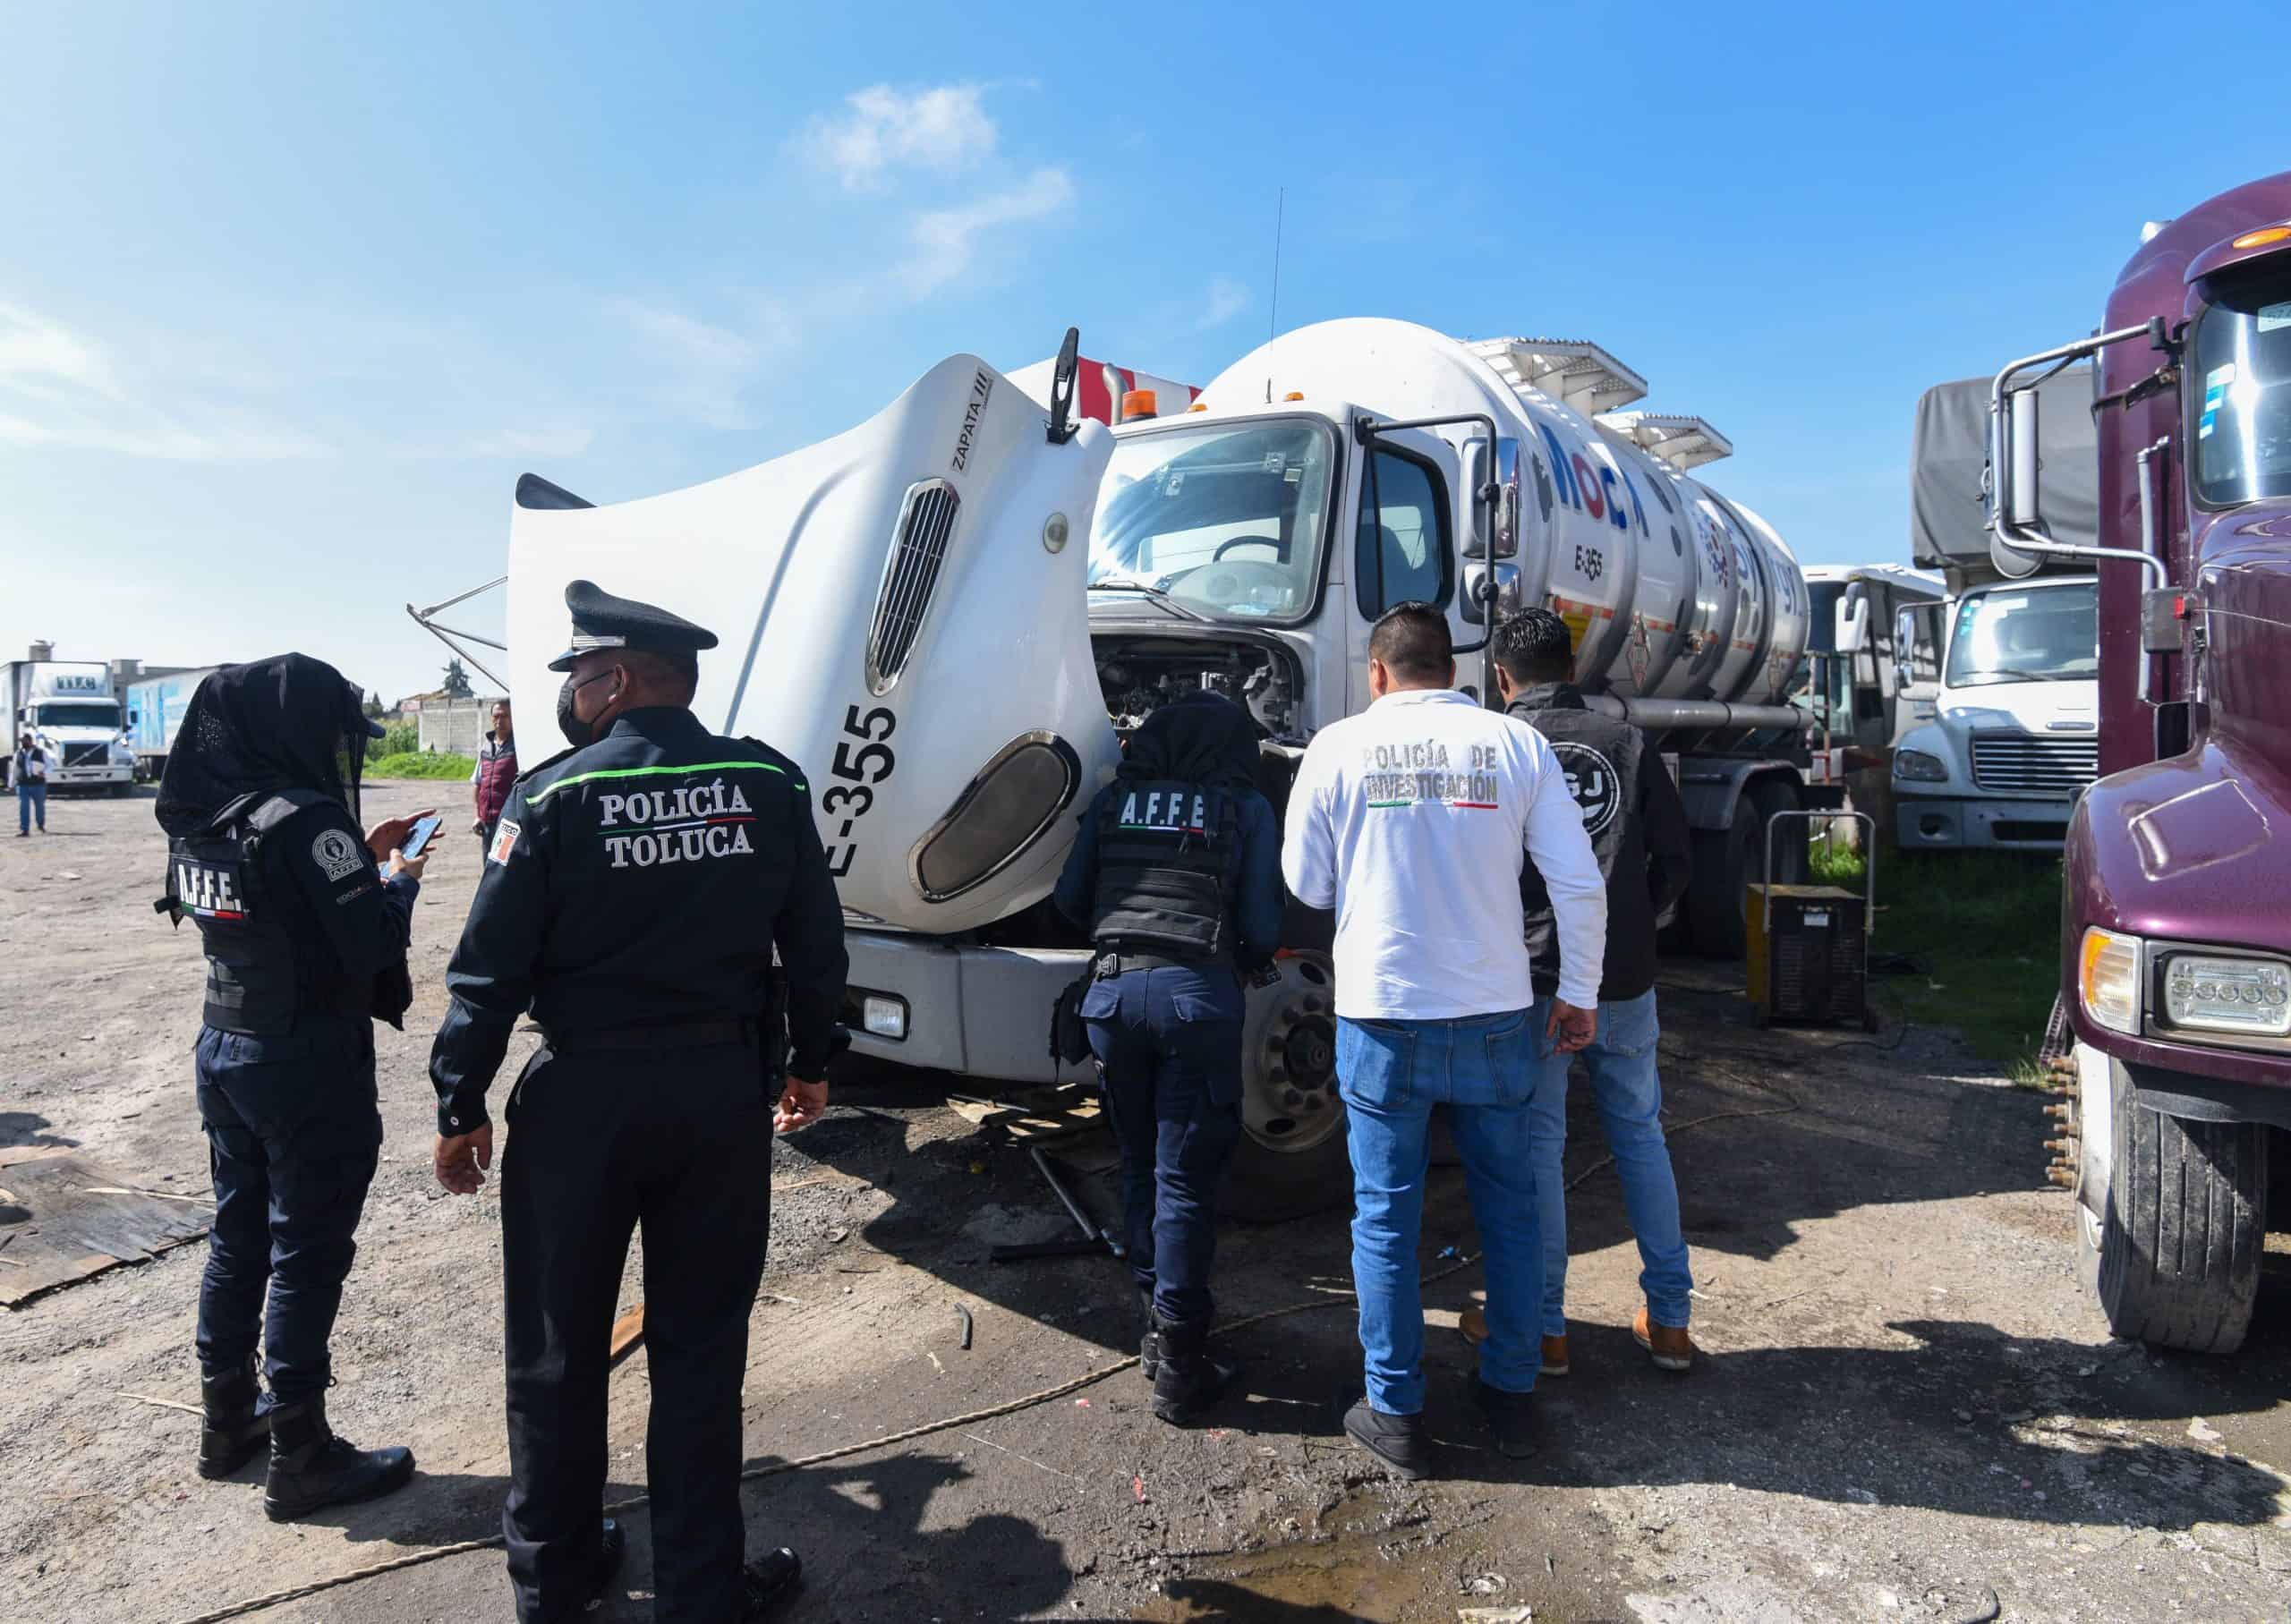 Toluca police inspecting a truck